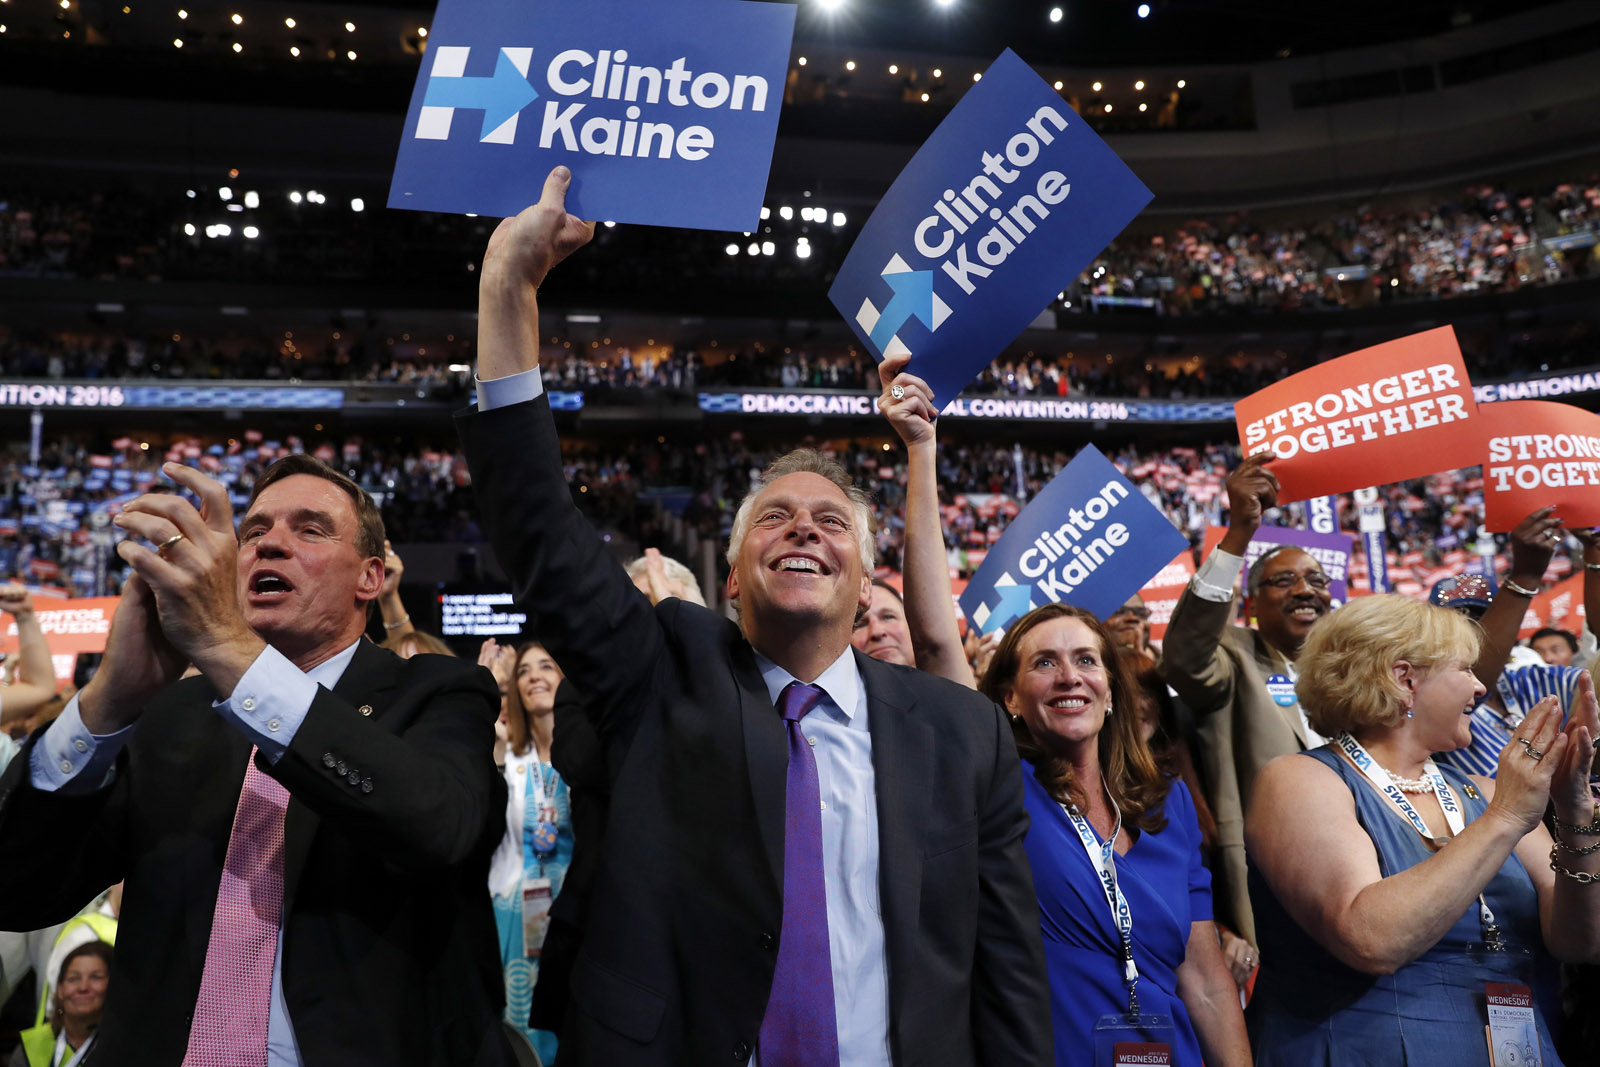 Virginia Gov. Terry McAuliffe and other delegates cheer as Democratic vice presidential candidate, Sen. Tim Kaine, D-Va., speaks during the third day session of the Democratic National Convention in Philadelphia, Wednesday, July 27, 2016. (AP Photo/Carolyn Kaster)